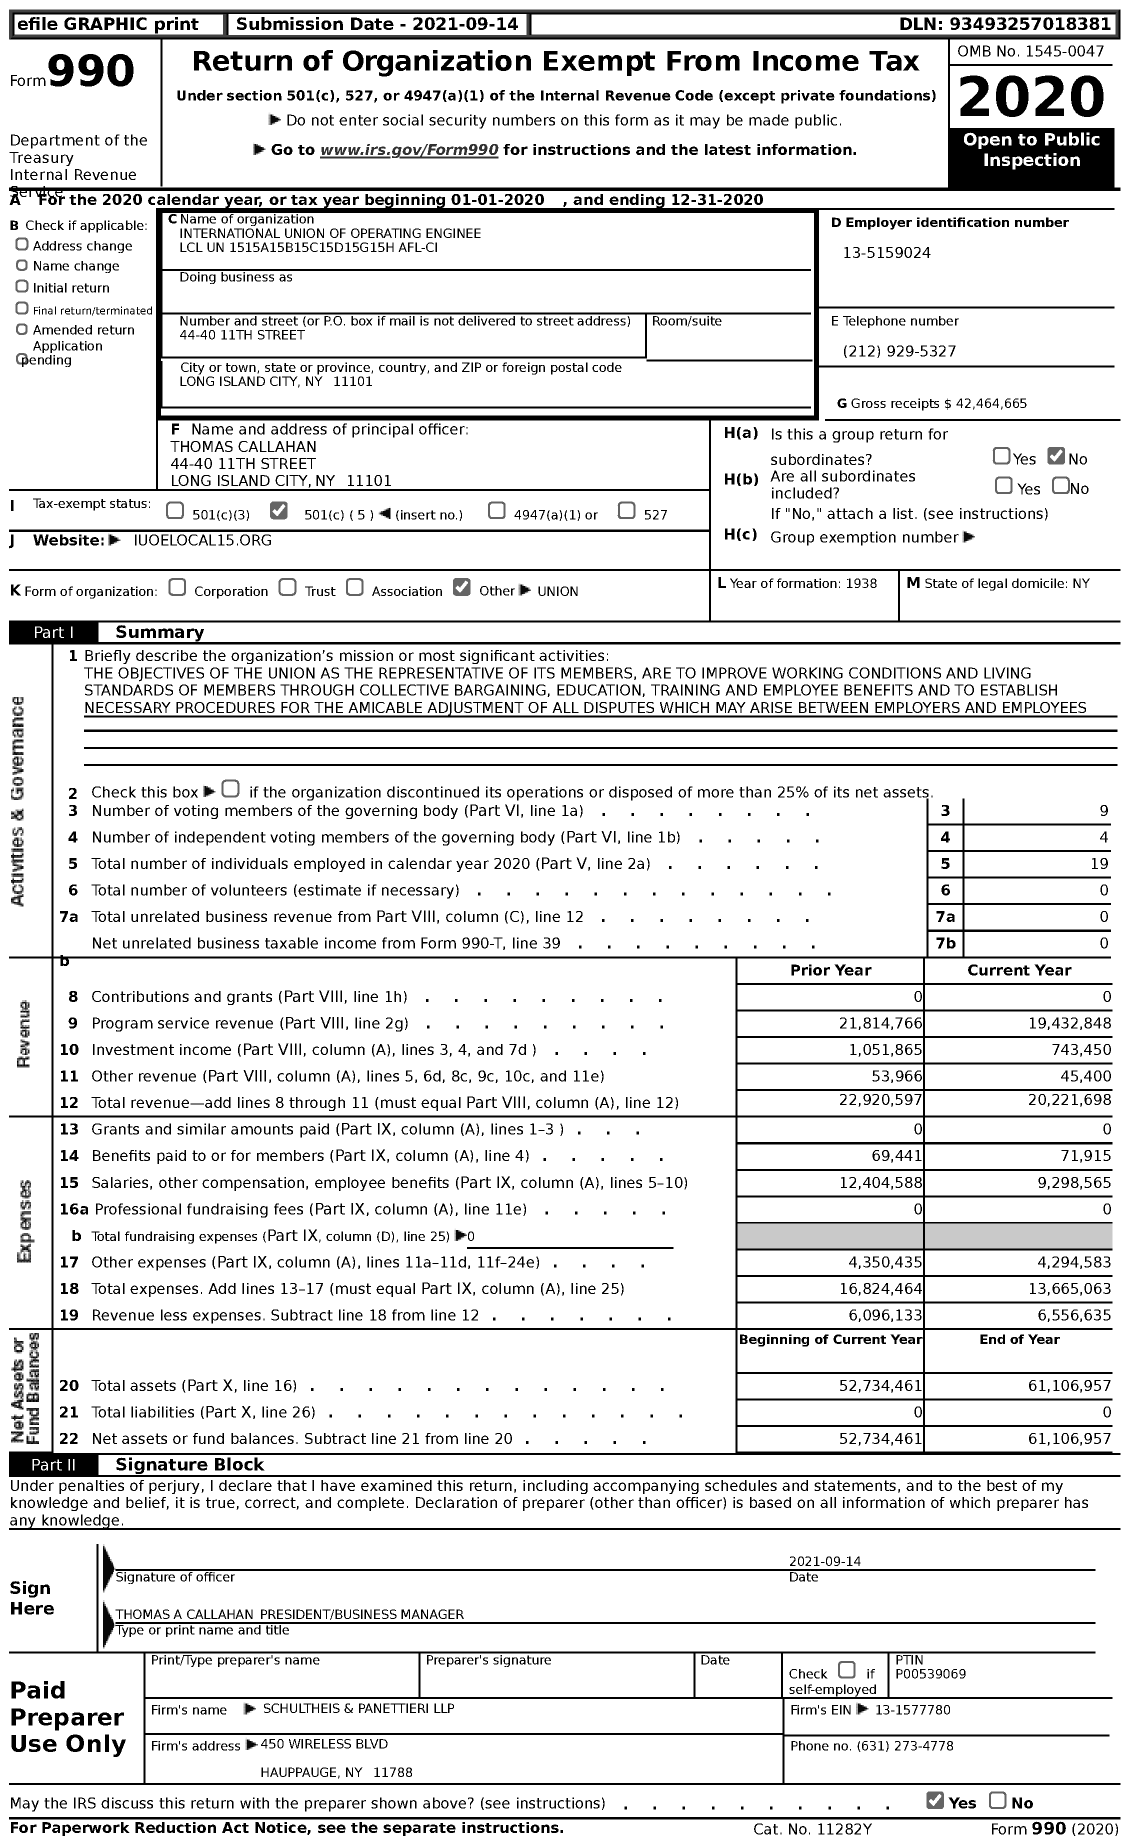 Image of first page of 2020 Form 990 for International Union of Operating Enginee LCL Union 1515a15b15c15d15g15h AFL-CIO